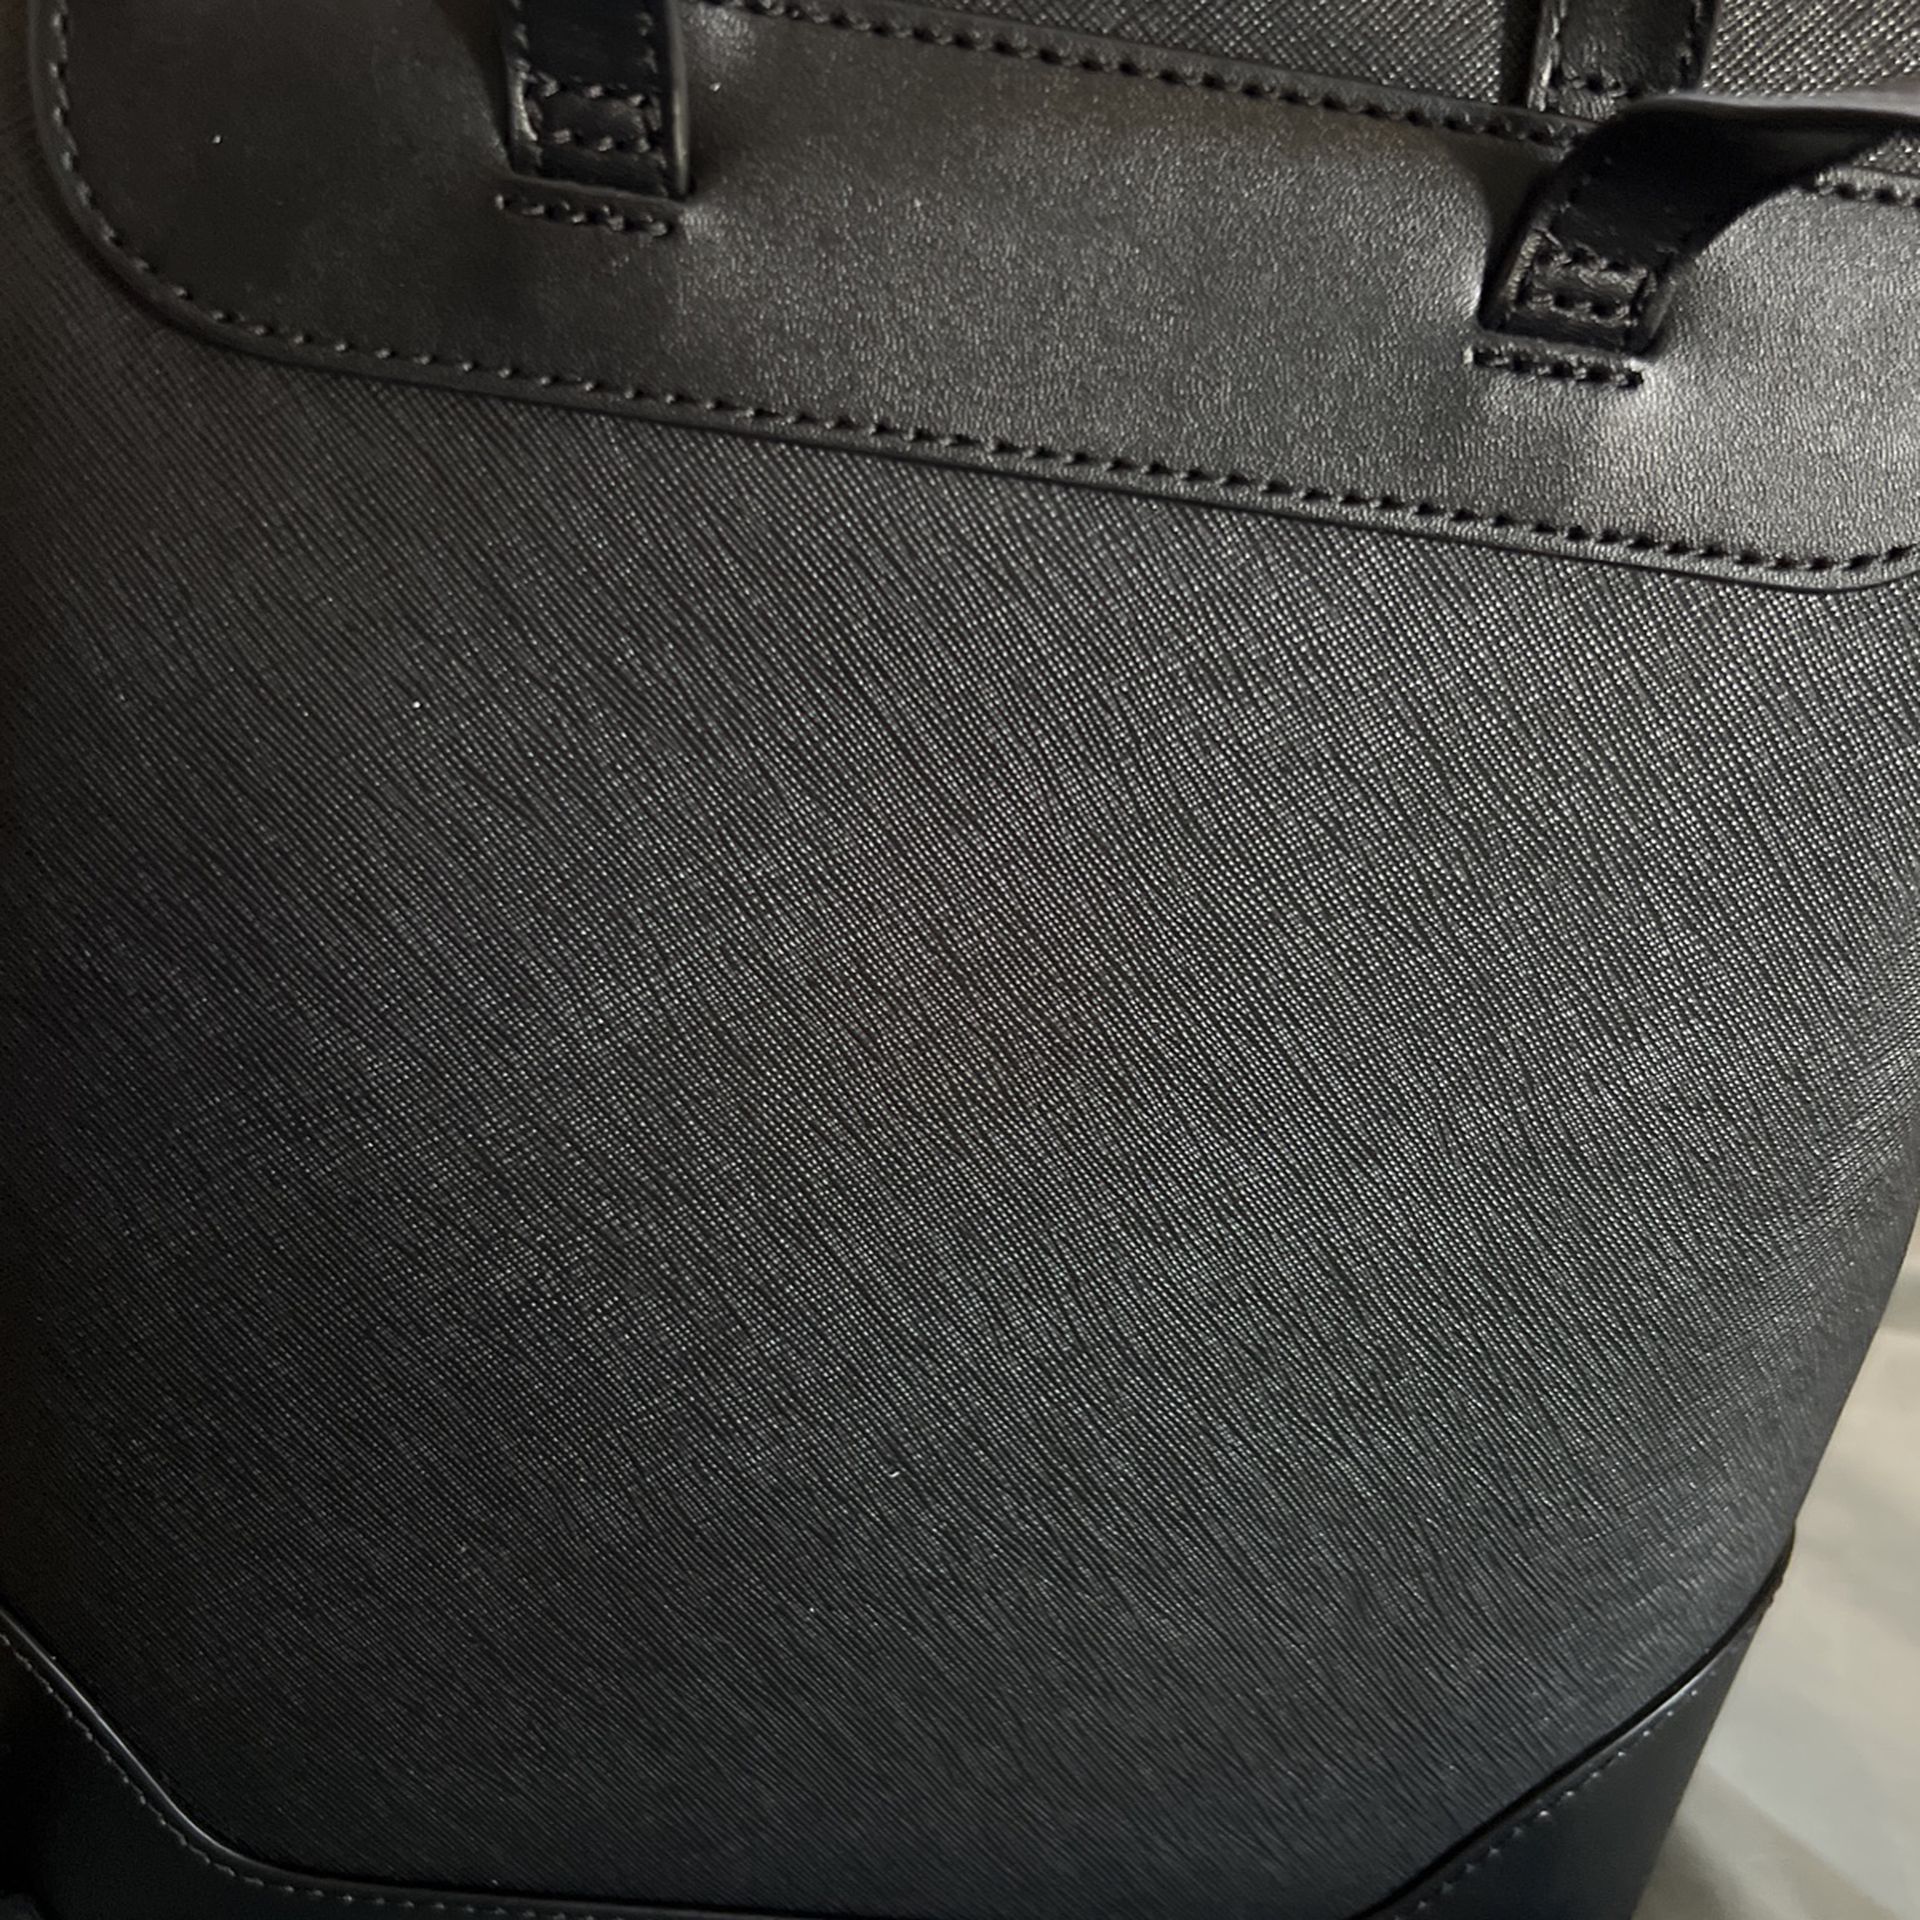 Michael Kors Rhea Black Backpack. for Sale in Pearland, TX - OfferUp